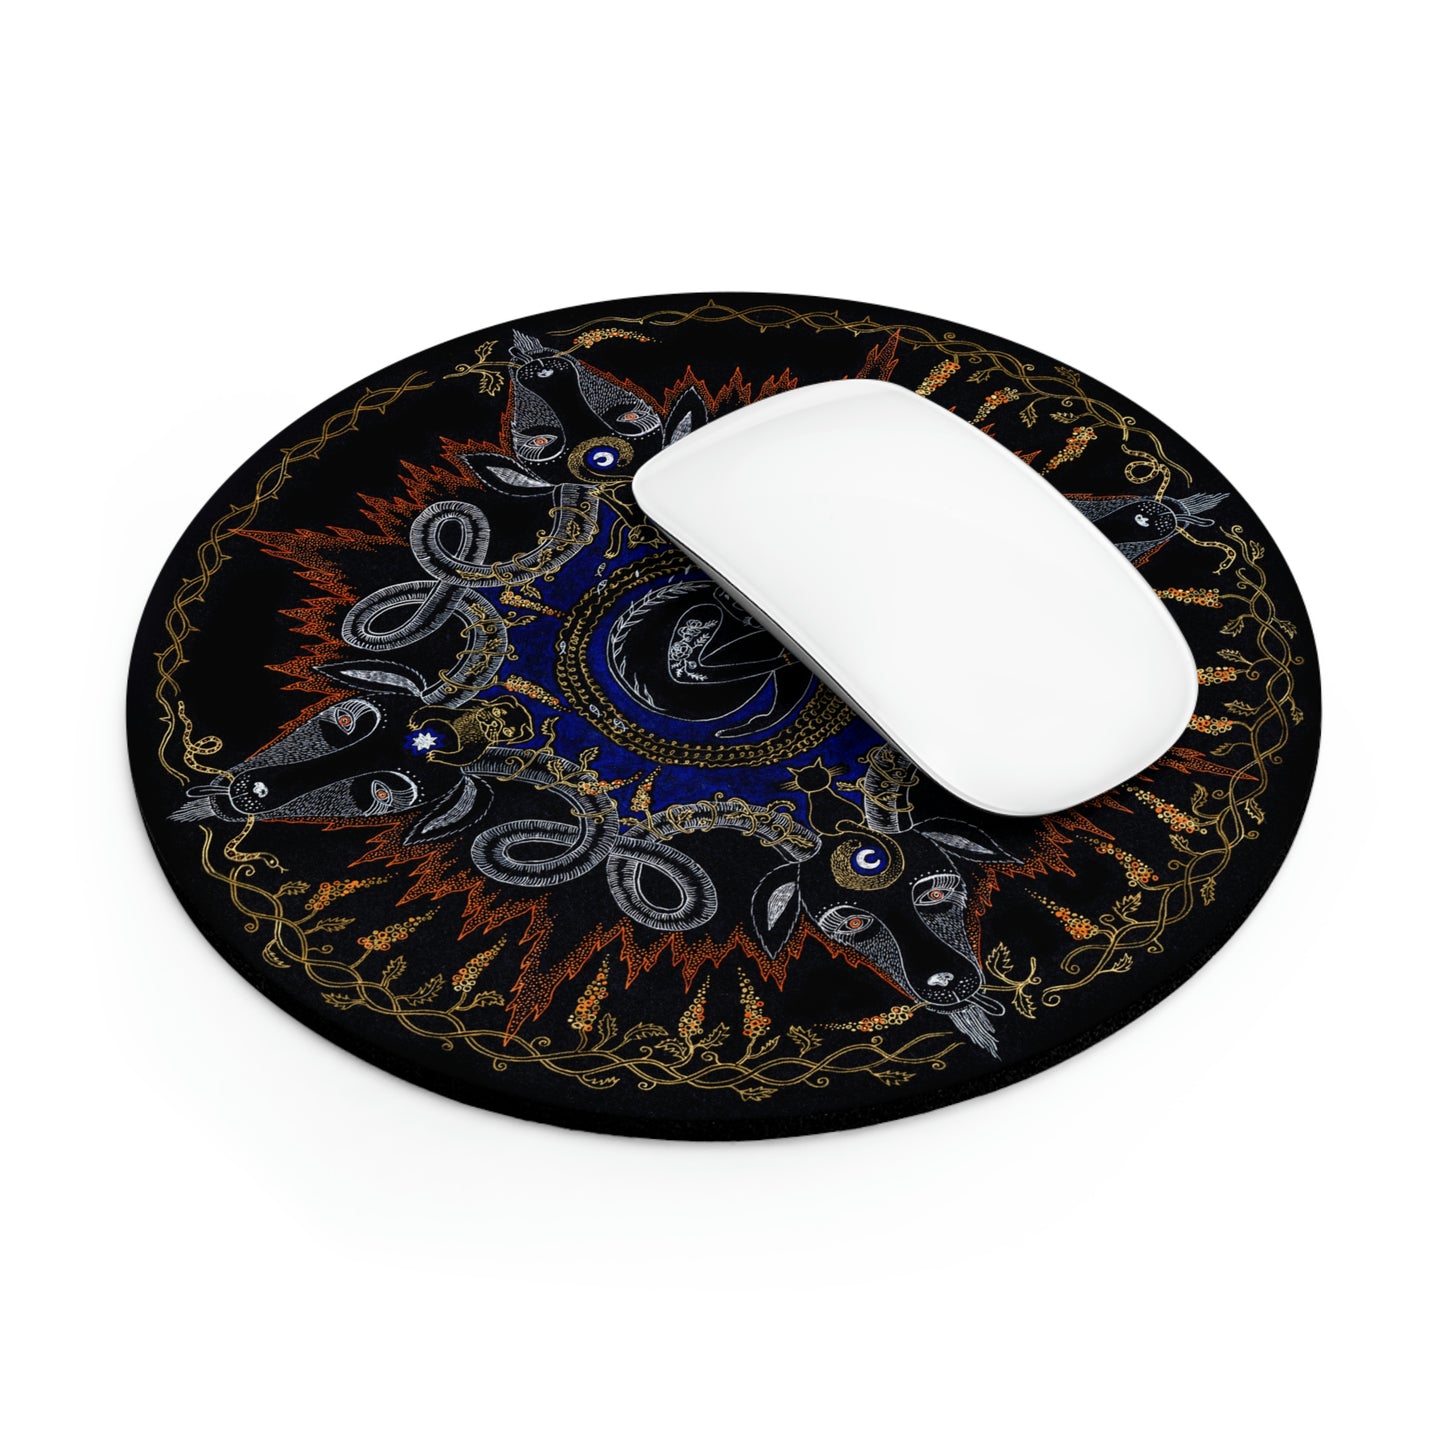 Chinese Zodiac Sign Mouse Pad (Goat)